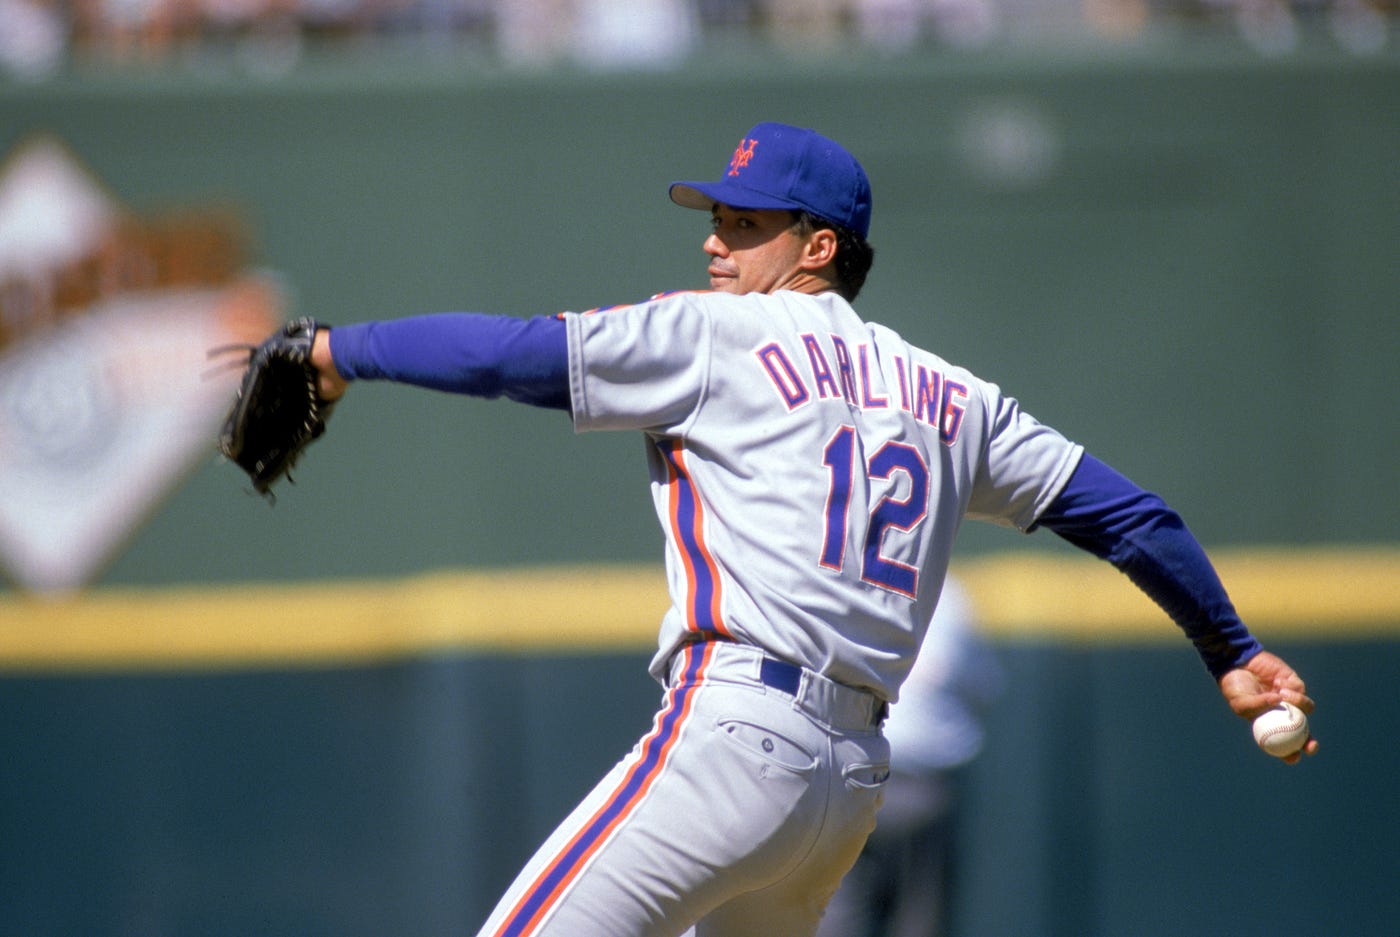 Seaver's Impact on Ron Darling. Ron Darling remembers his first meeting…, by New York Mets